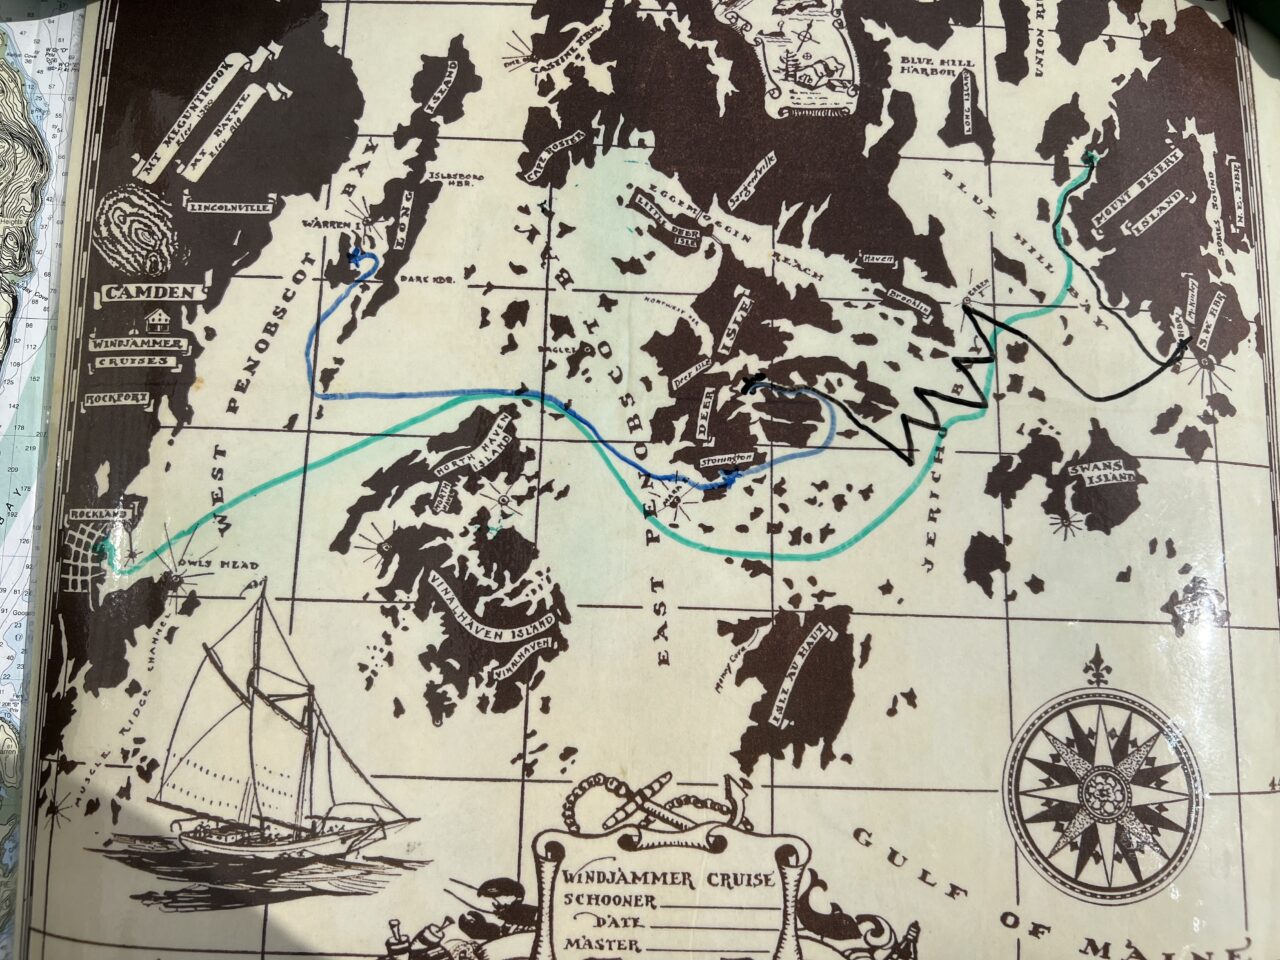 Here's the course we sailed on our four-night cruise.